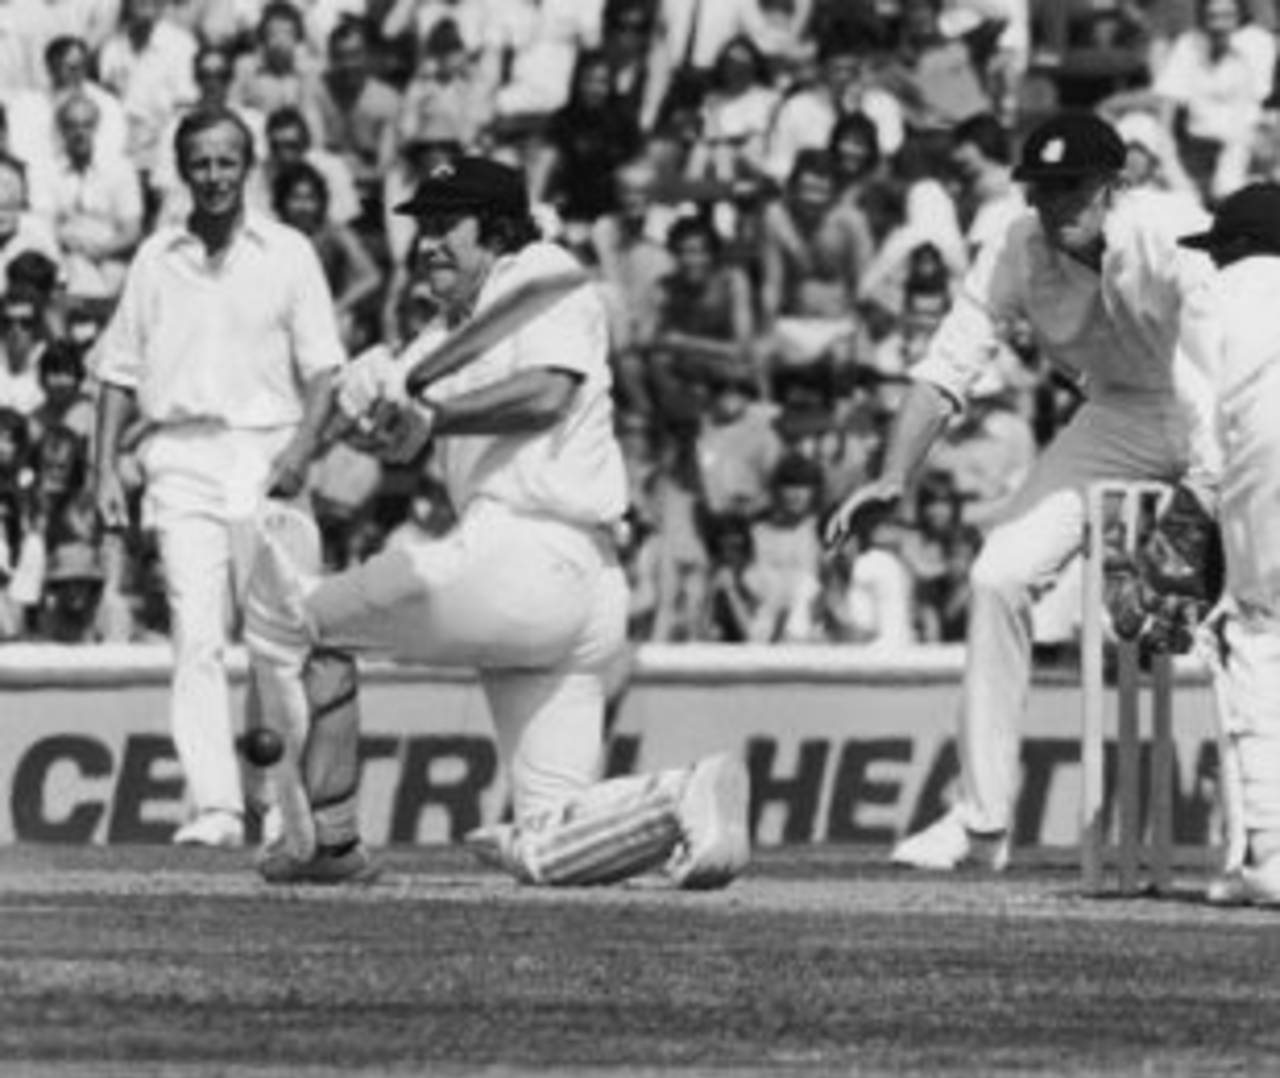 Ian Chappell plays the sweep, England v Australia, 4th Test, The Oval, August 28, 1975